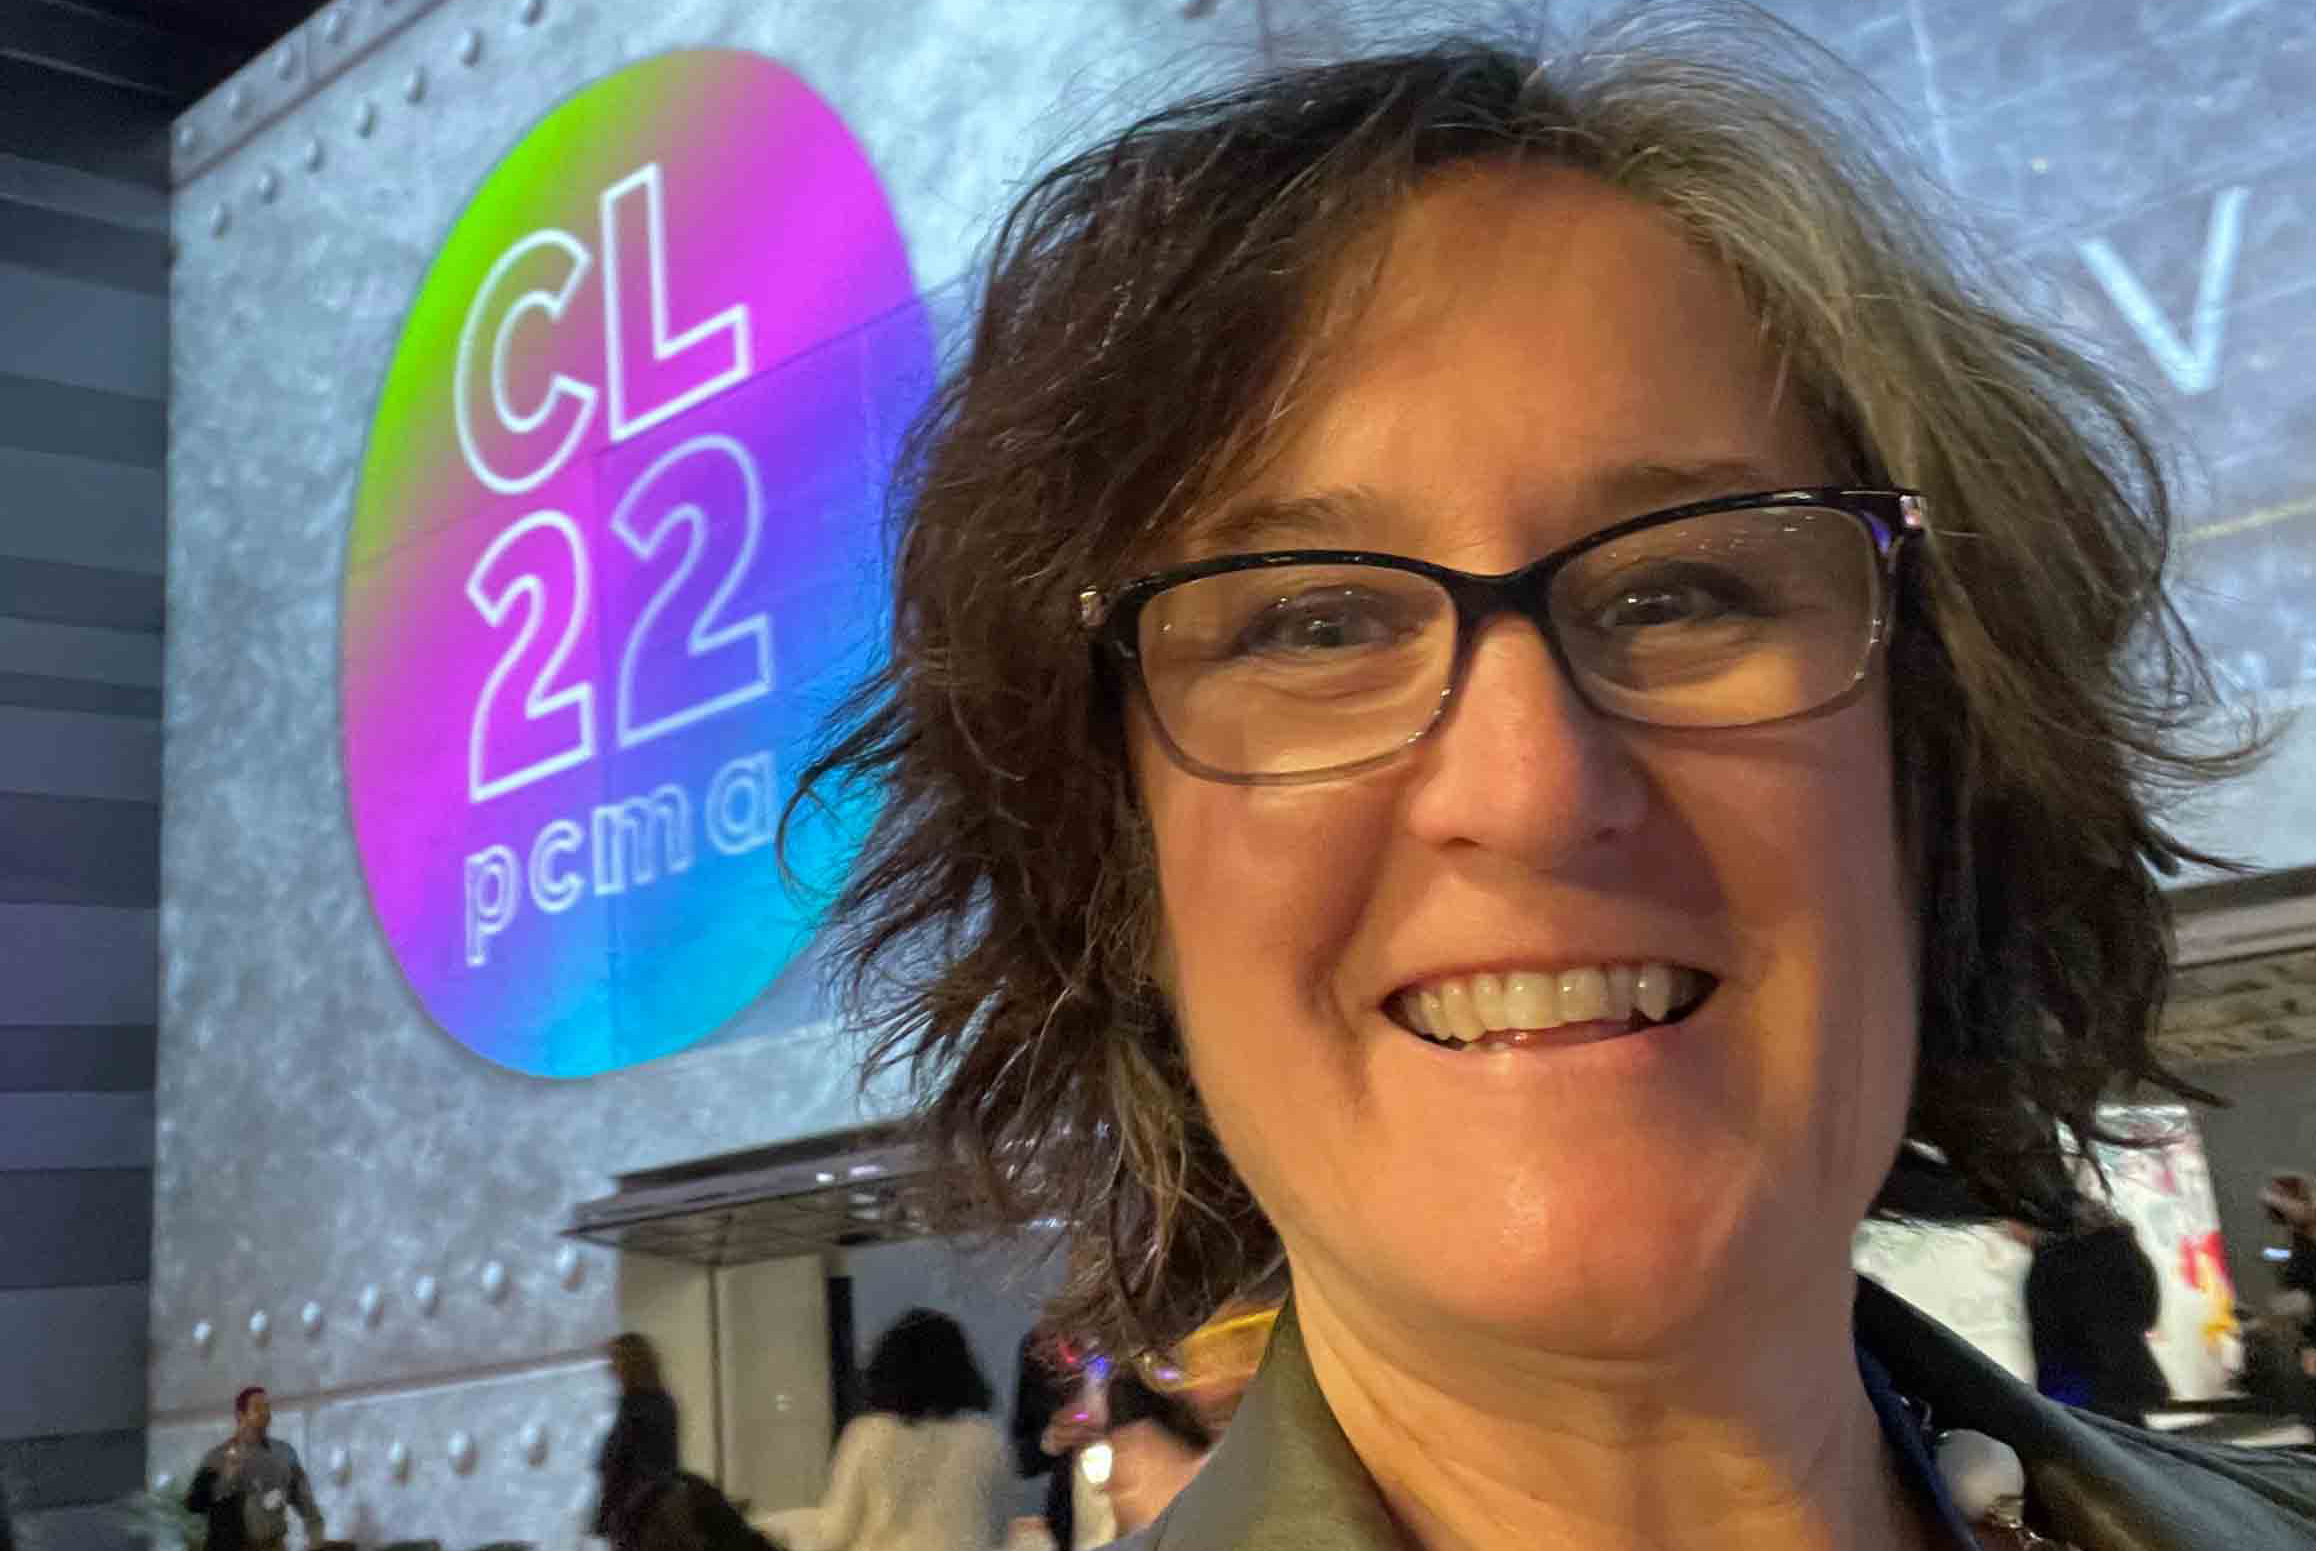 close-up selfie of smiling woman standing in front of a sign on a wall - CL22 PCMA